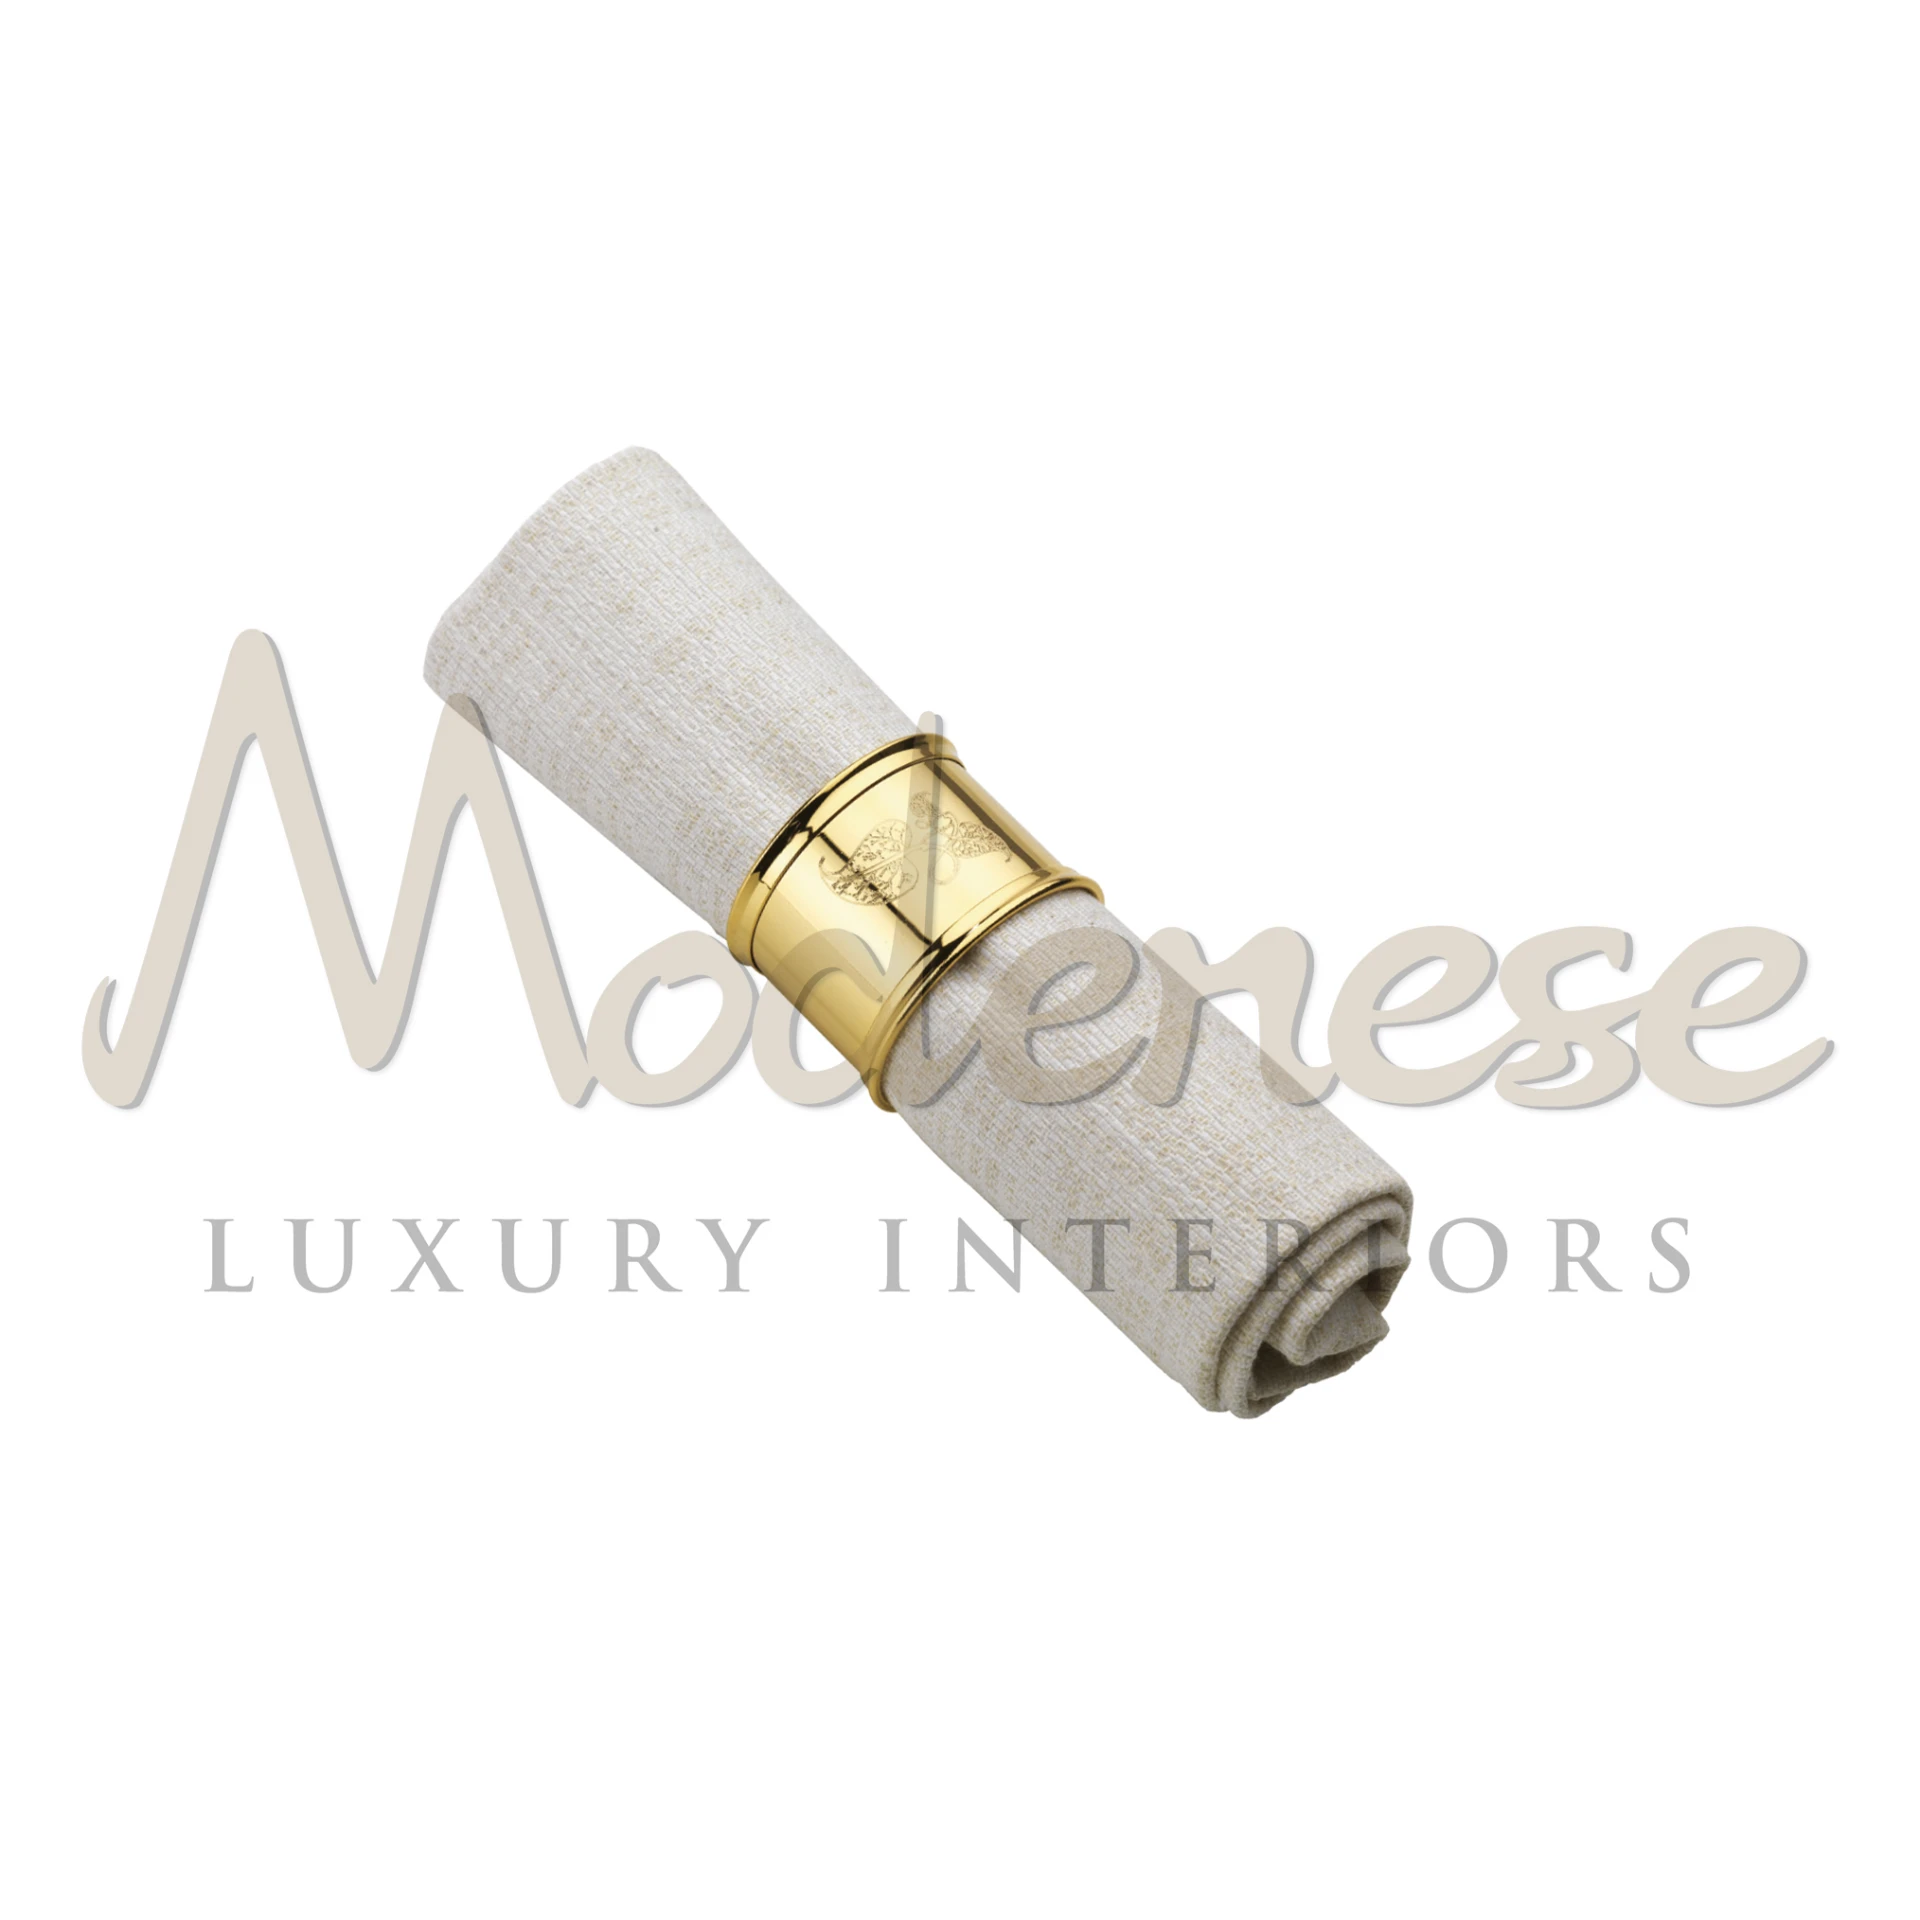 The 'Classy Napkin Holder' by Modenese, showcasing a golden ring on a rolled napkin.